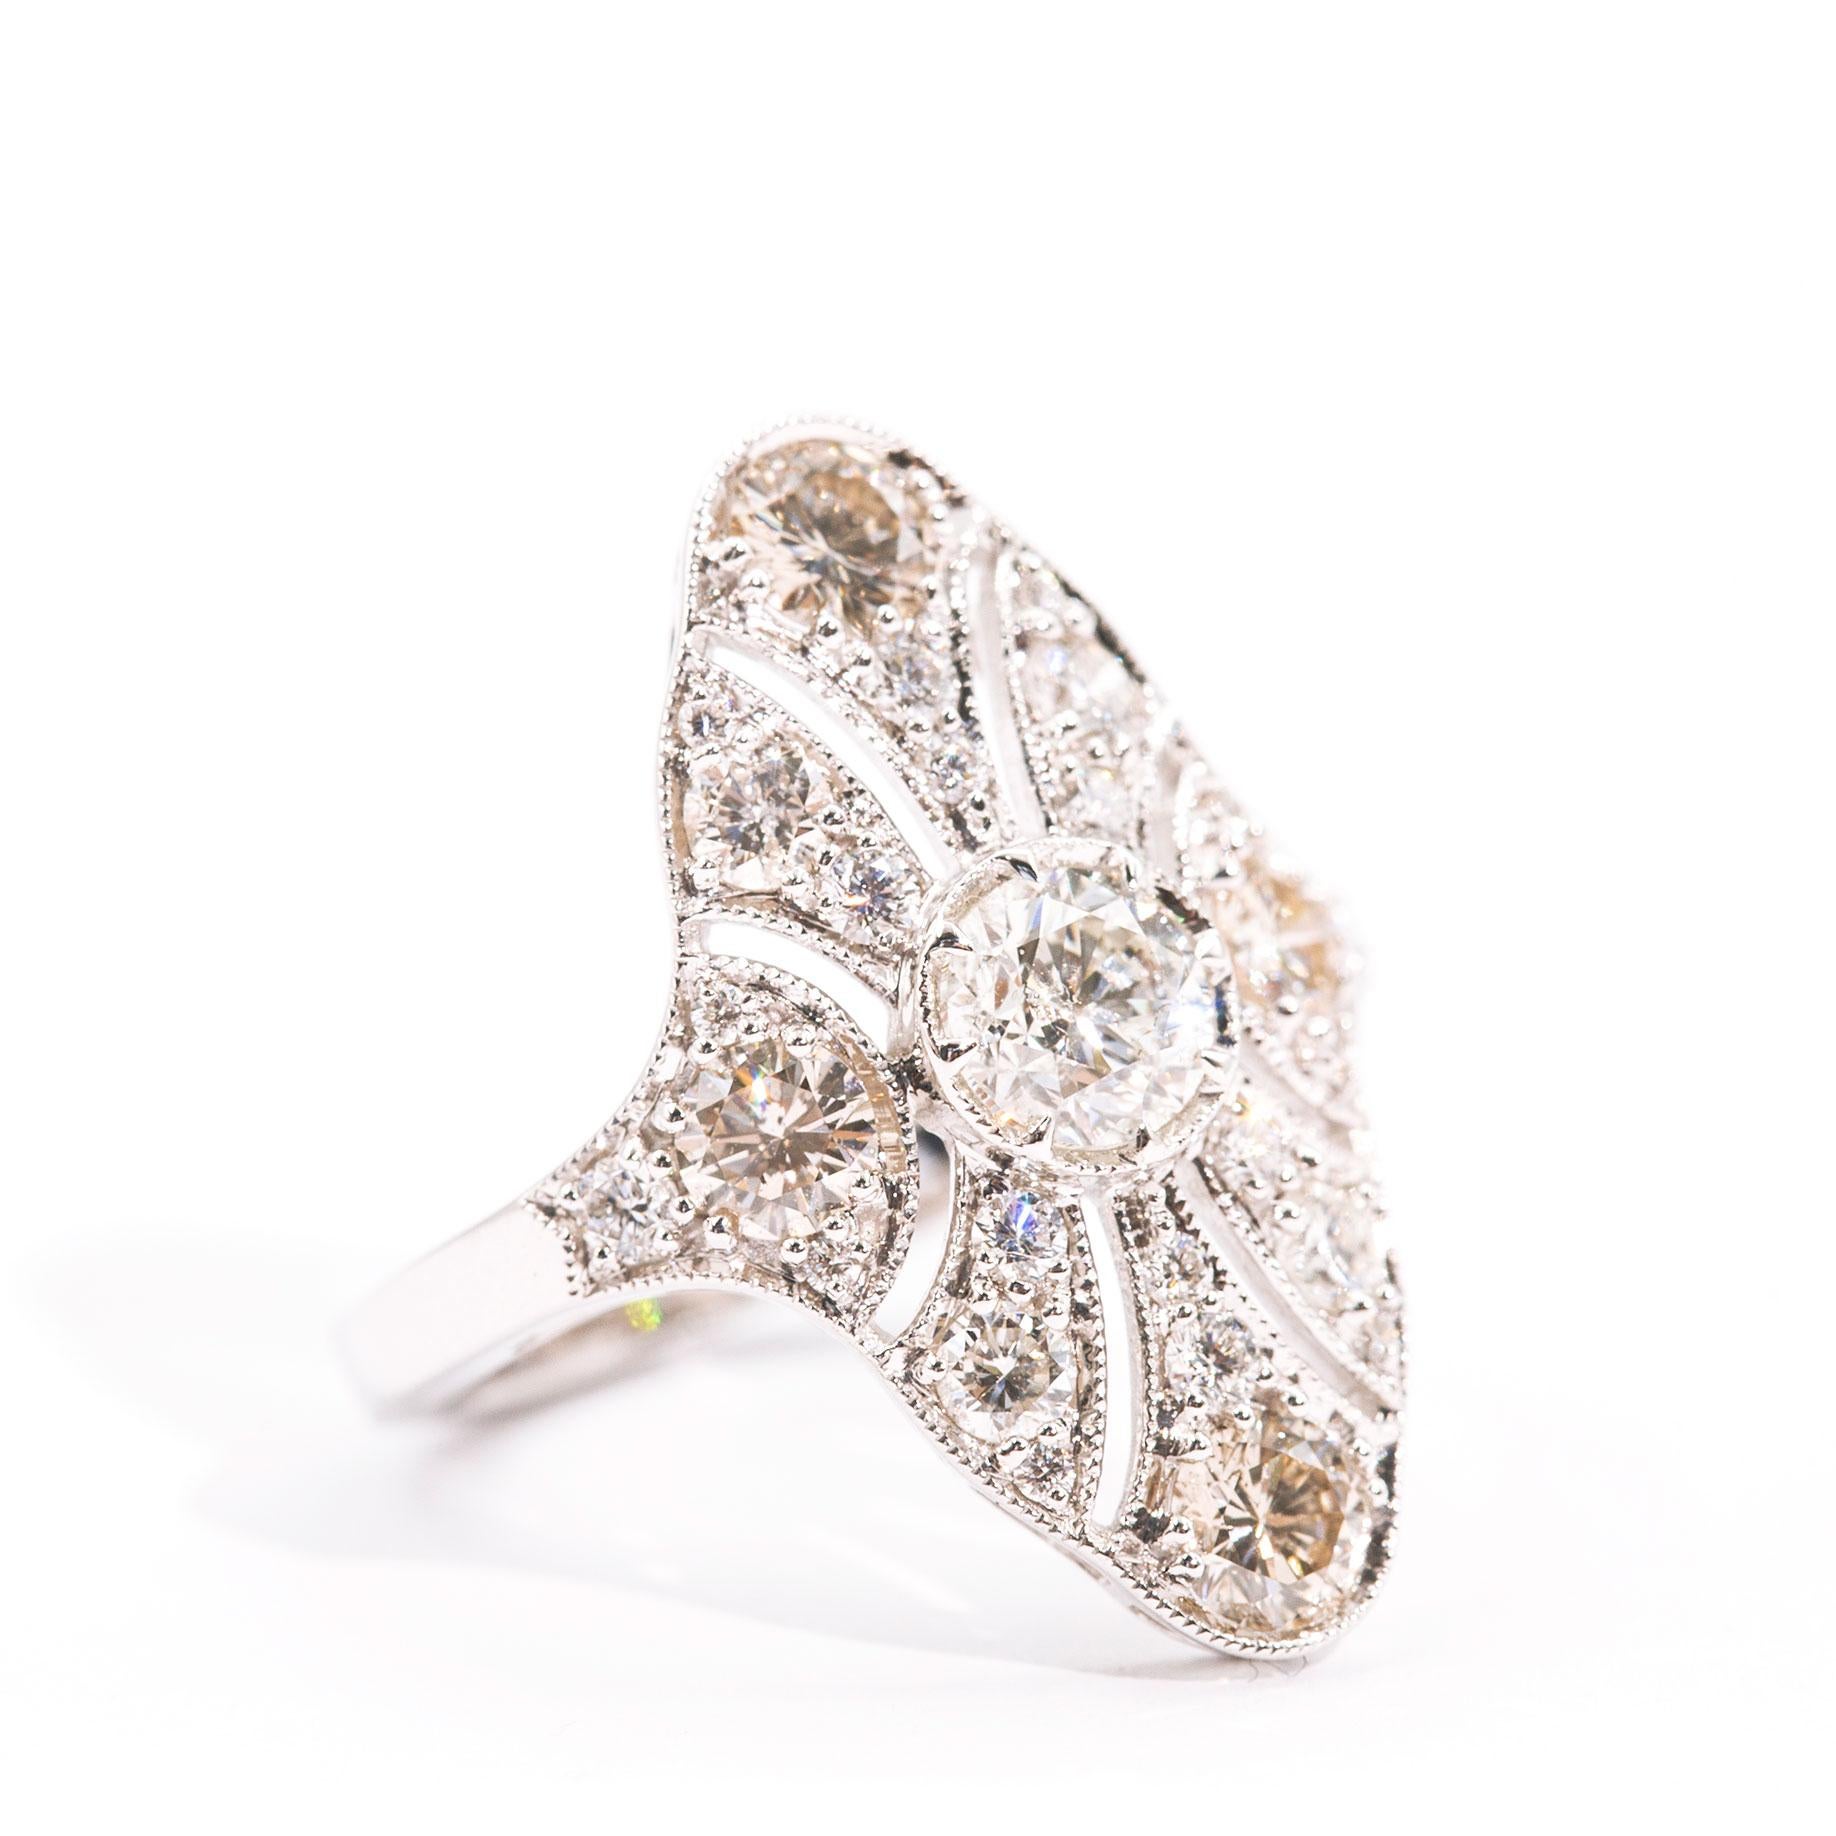 Forged in 18 carat white gold, this antique inspired cluster ring features a sparkling 0.71 carat certified round brilliant cut diamond in the centre of a glimmering gallery of round brilliant cut diamonds totalling 1.59 carats. We have named this